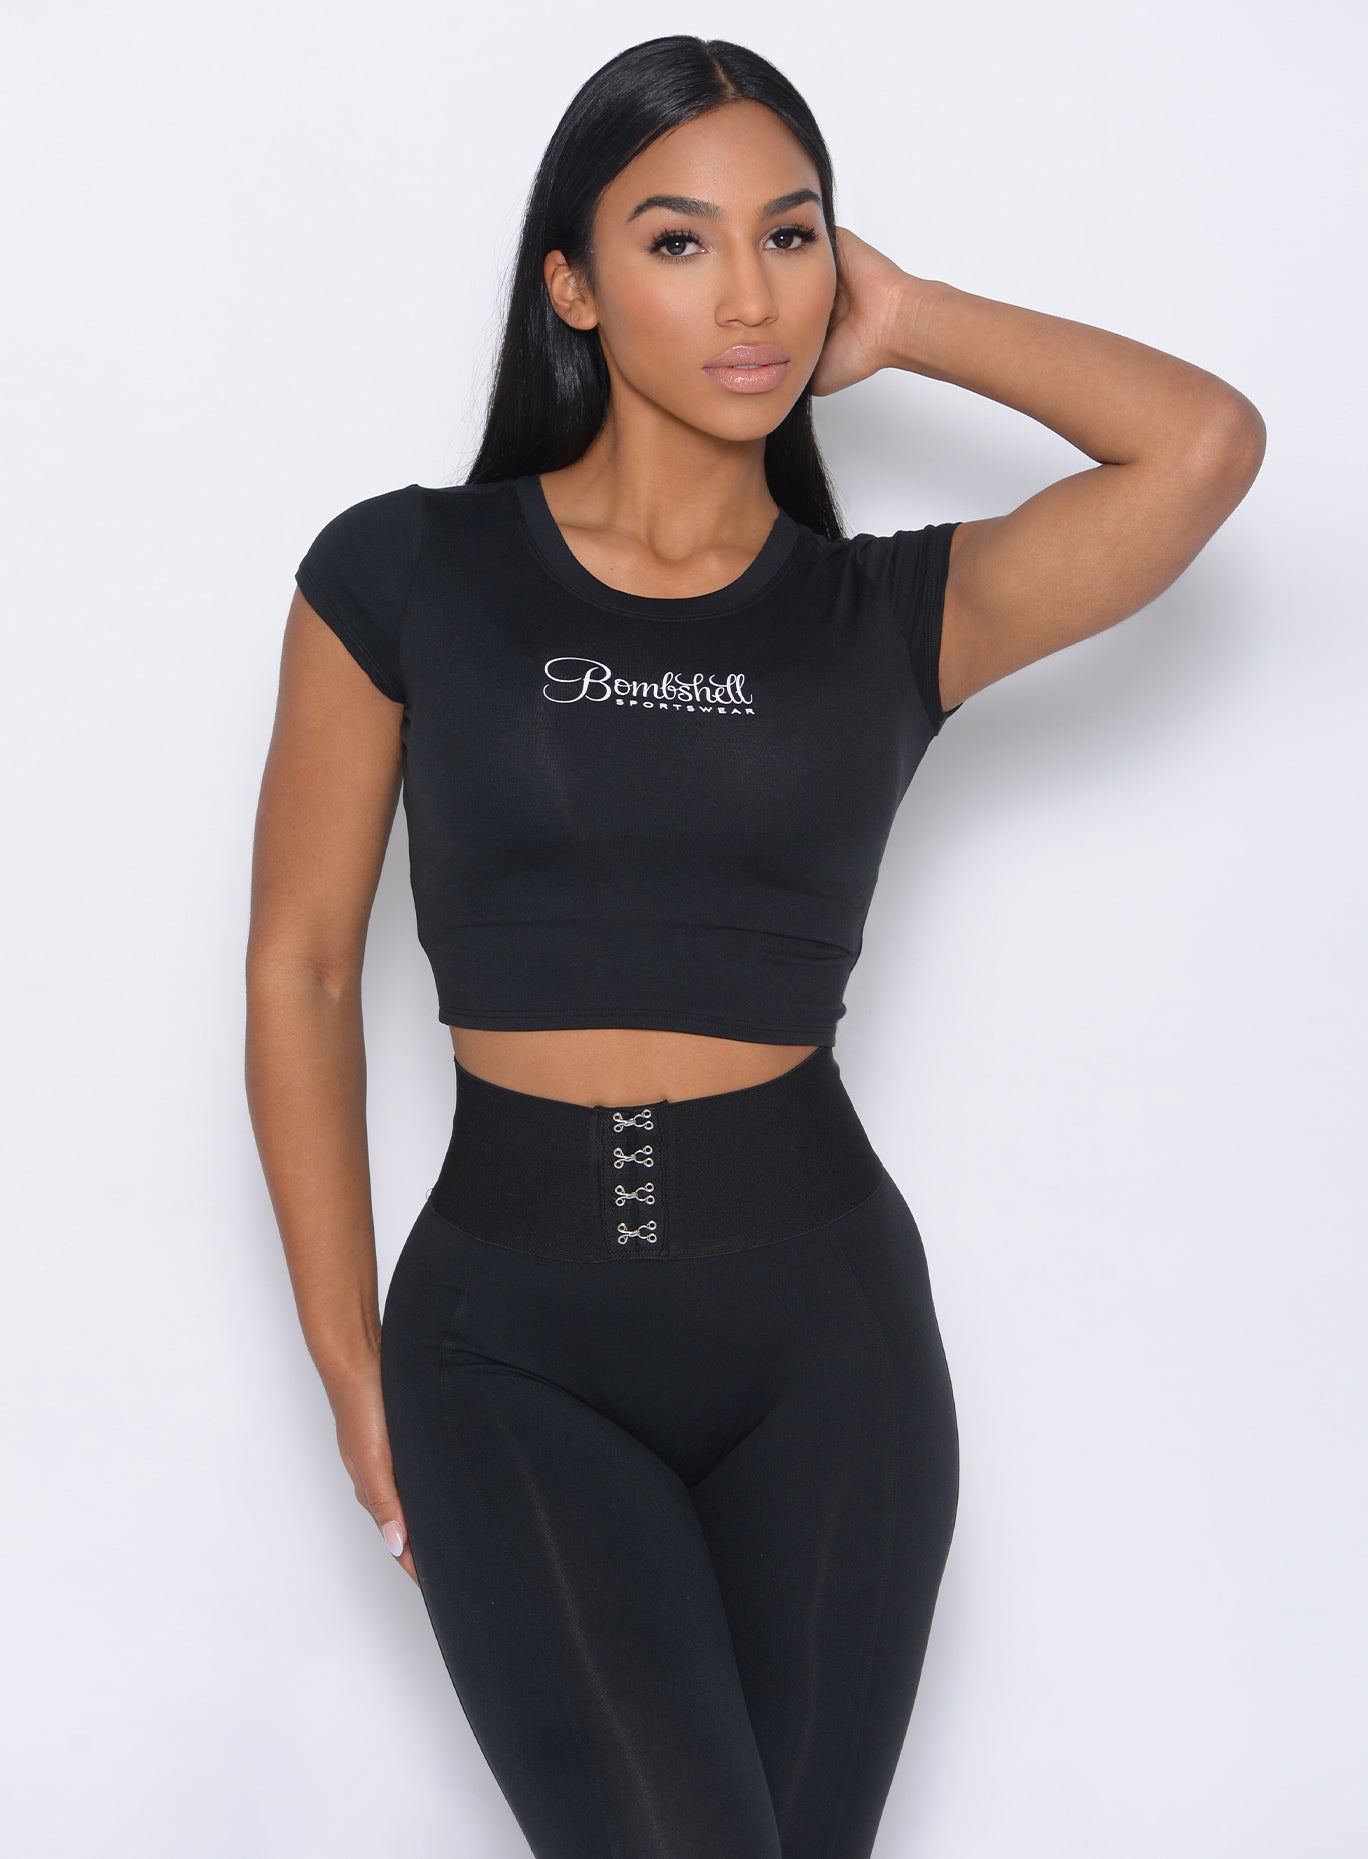 Model facing forward in our black fit fam tee and a matching leggings